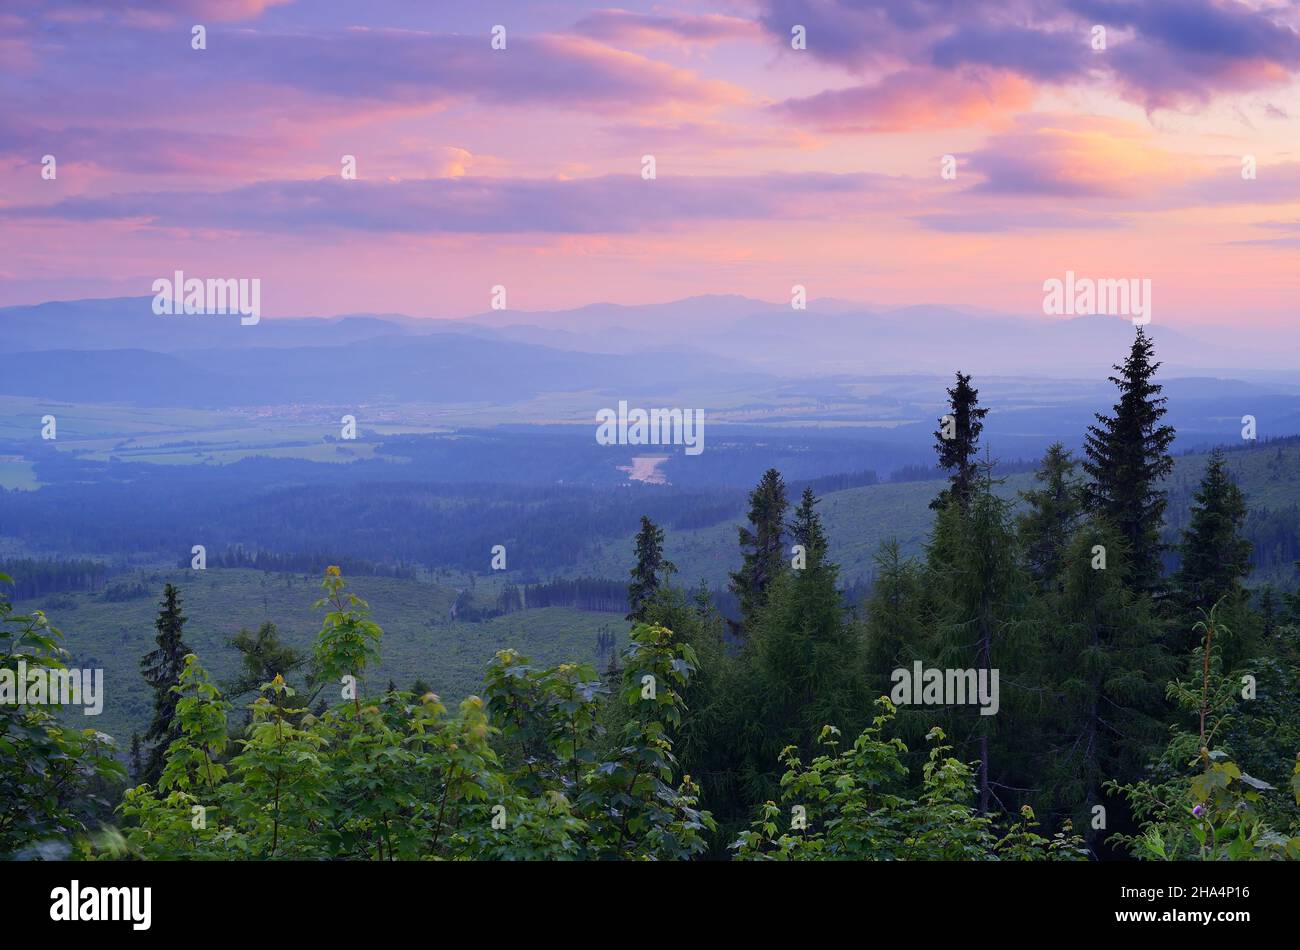 Landscape with a colorful sunset and pine forest Stock Photo